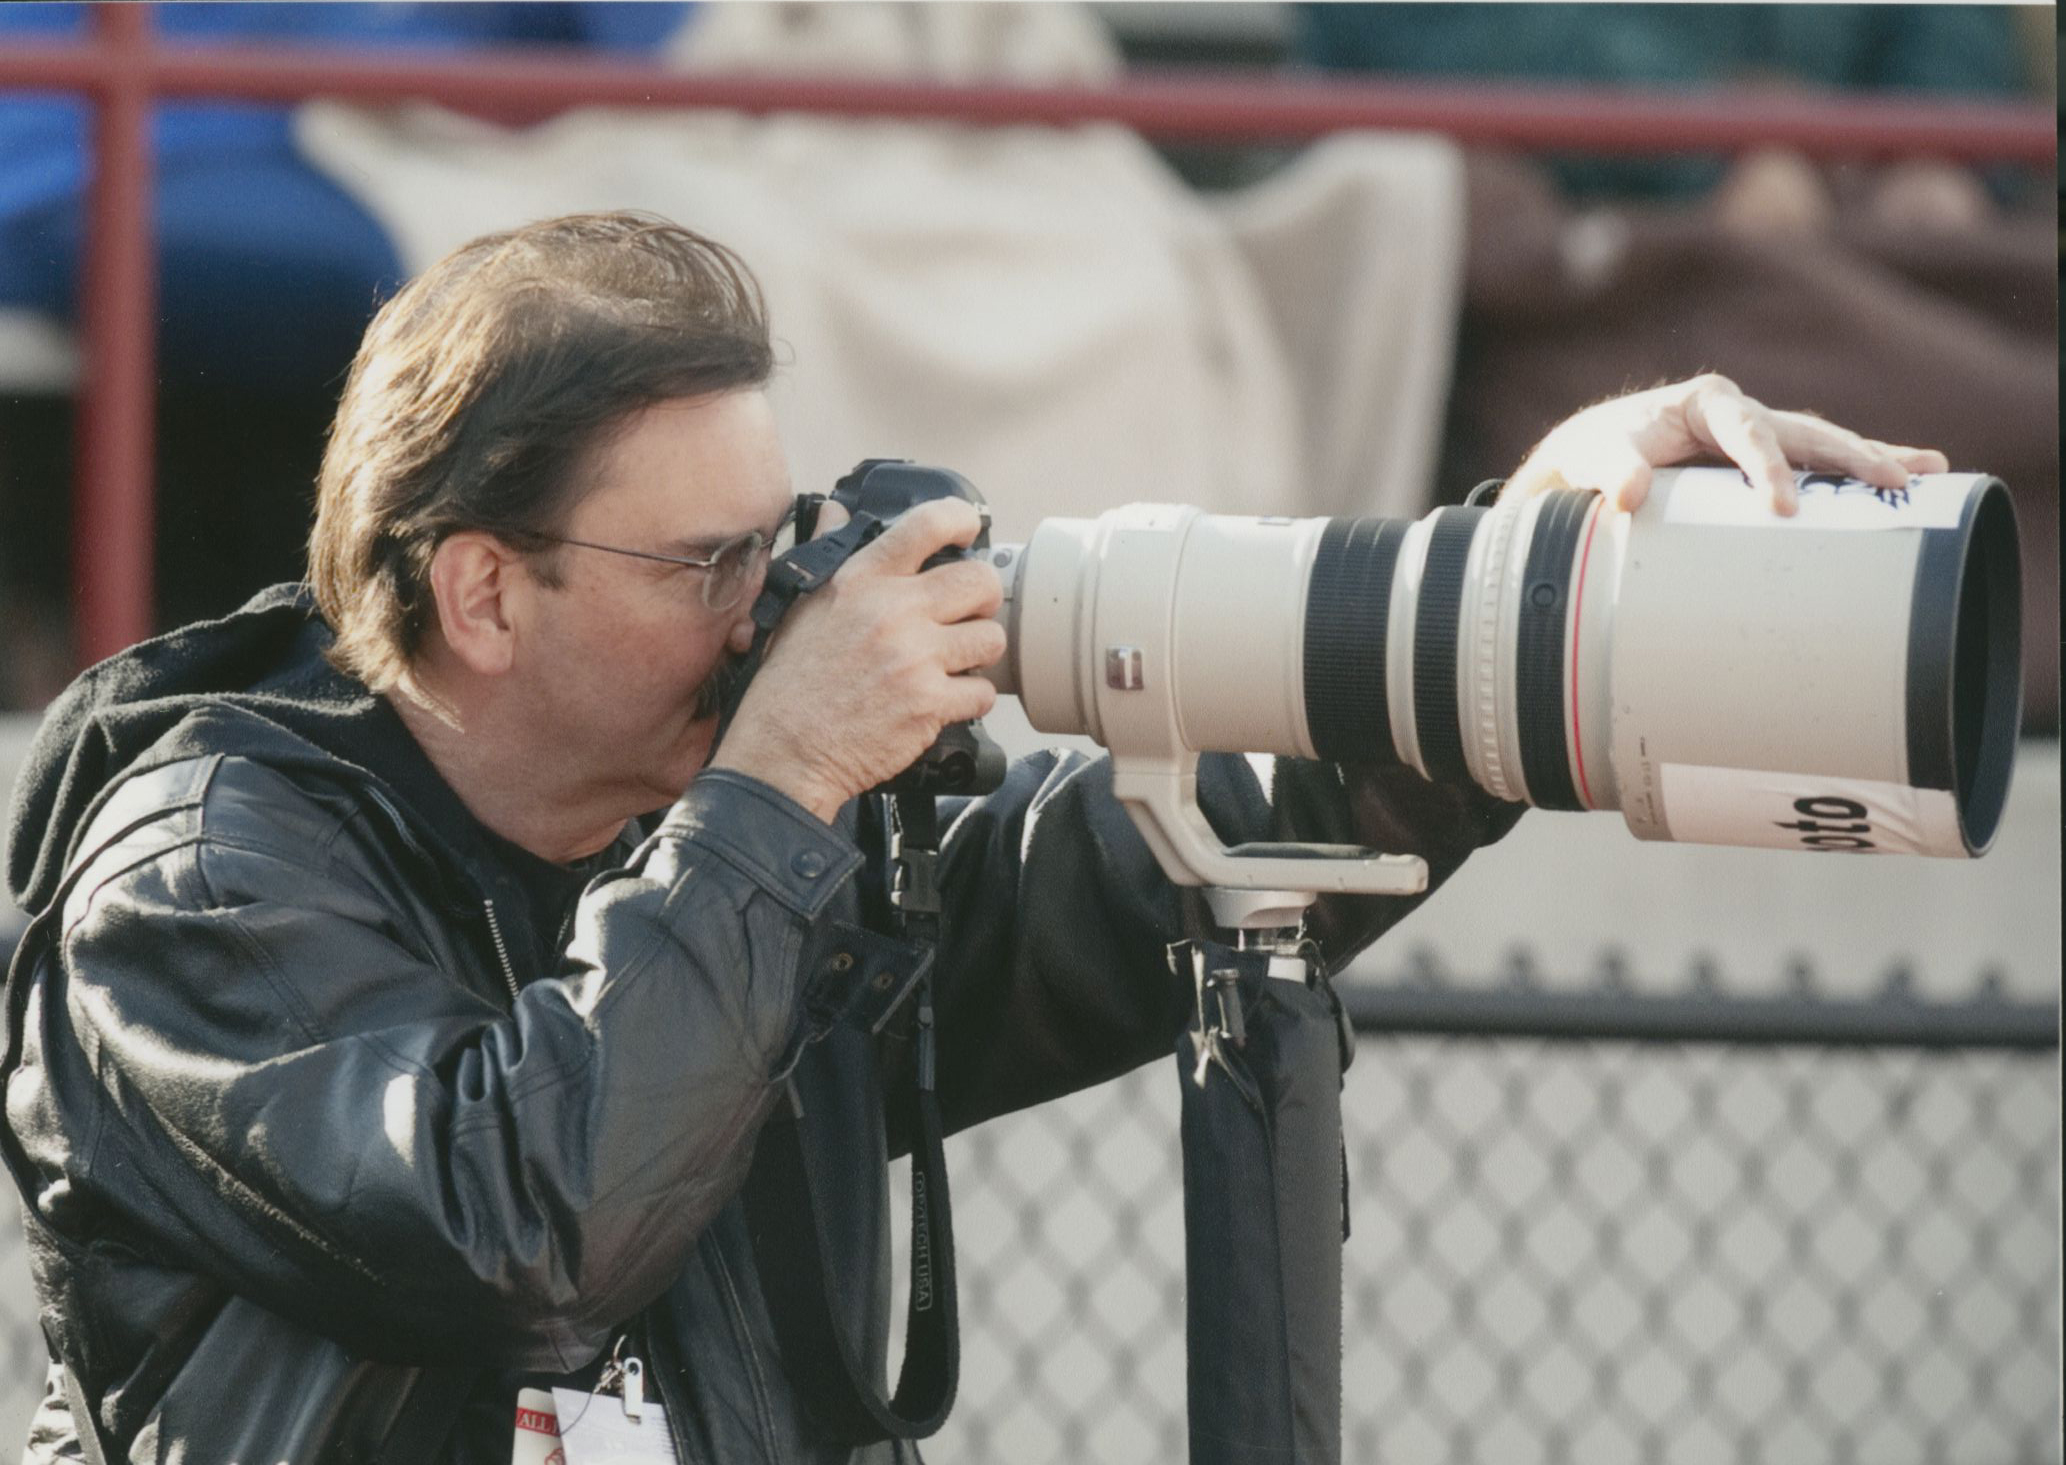 Jeff Sabo using a 400mm lens out on the field